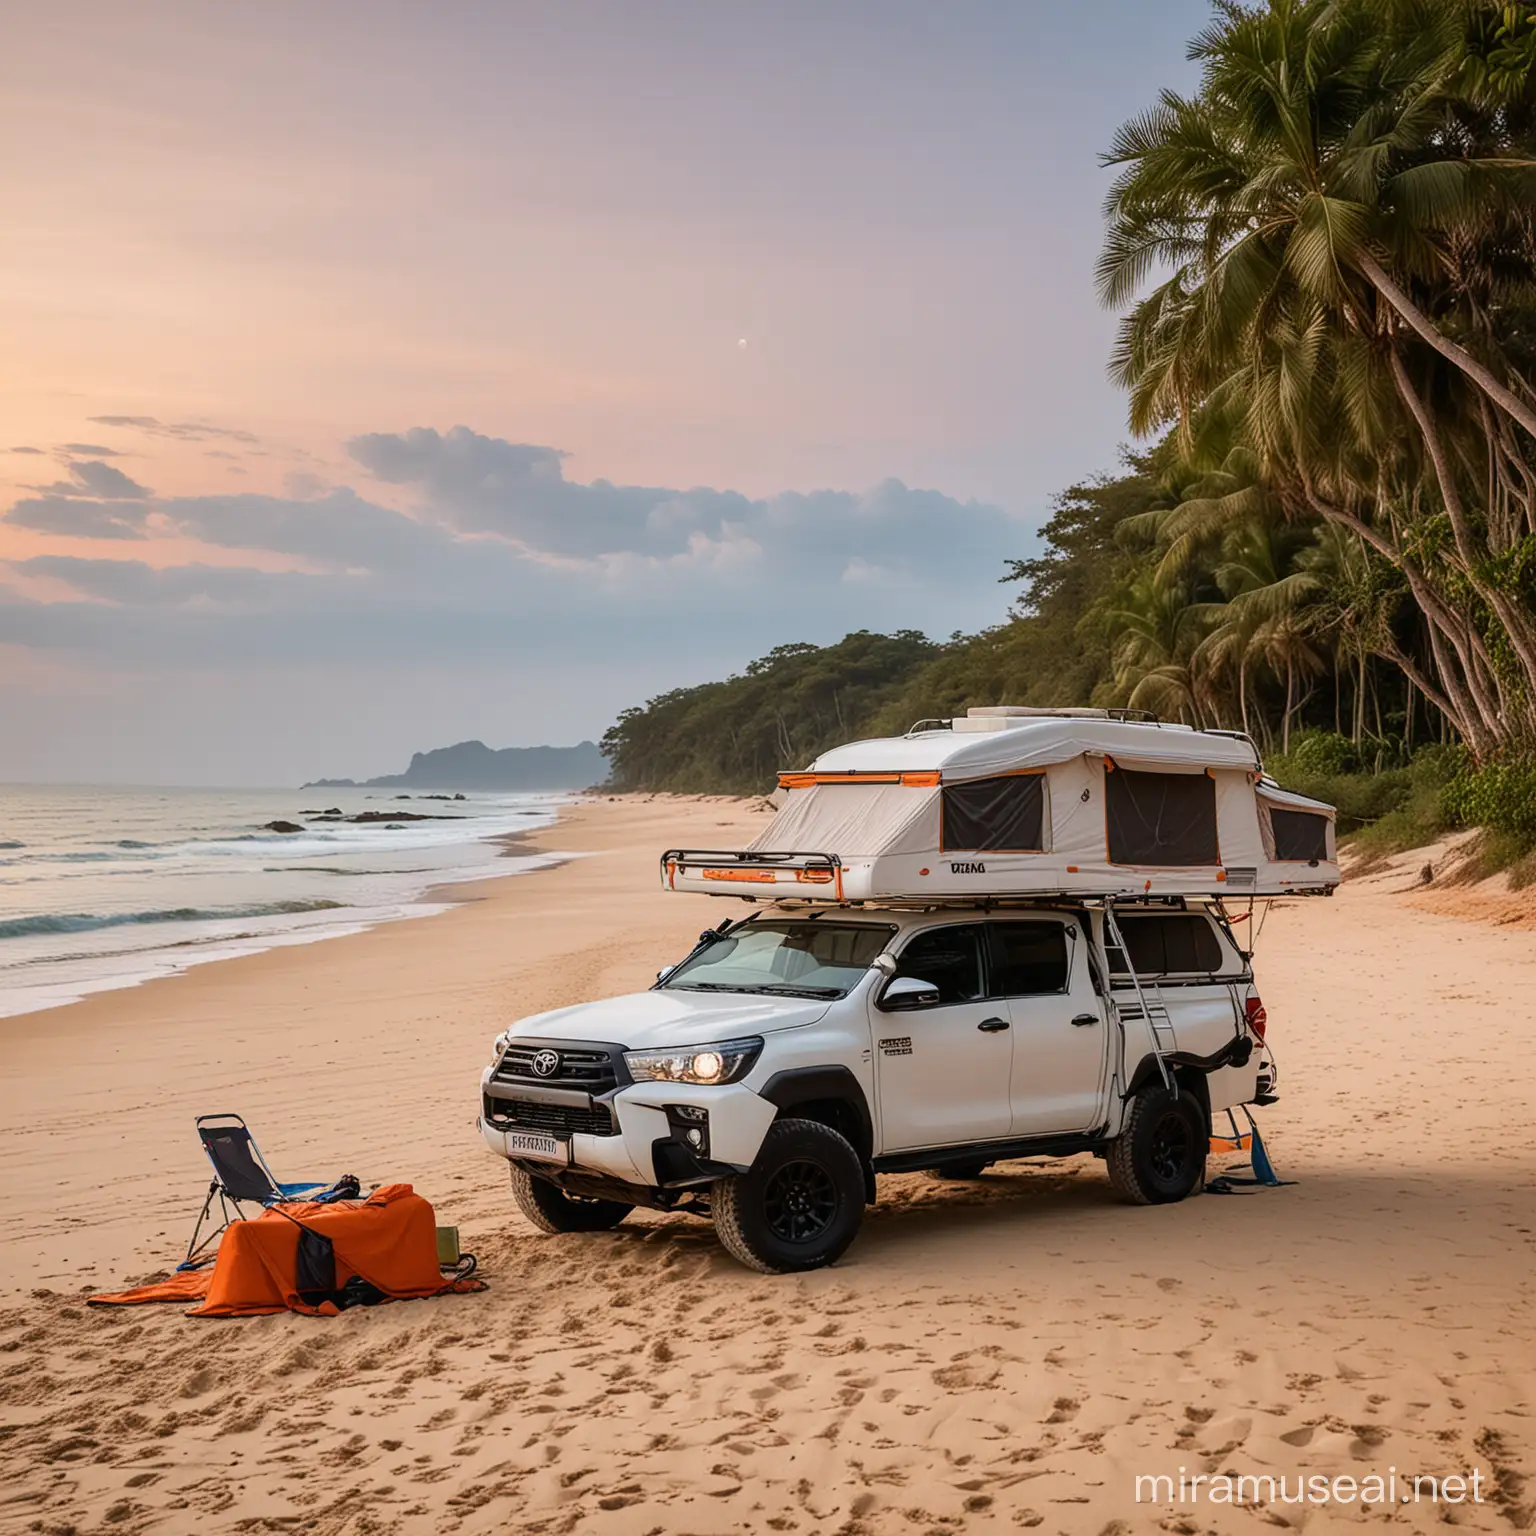 Indie Campers Adventure Toyota Hilux Motorhome on Secluded Thai Beach at Dusk